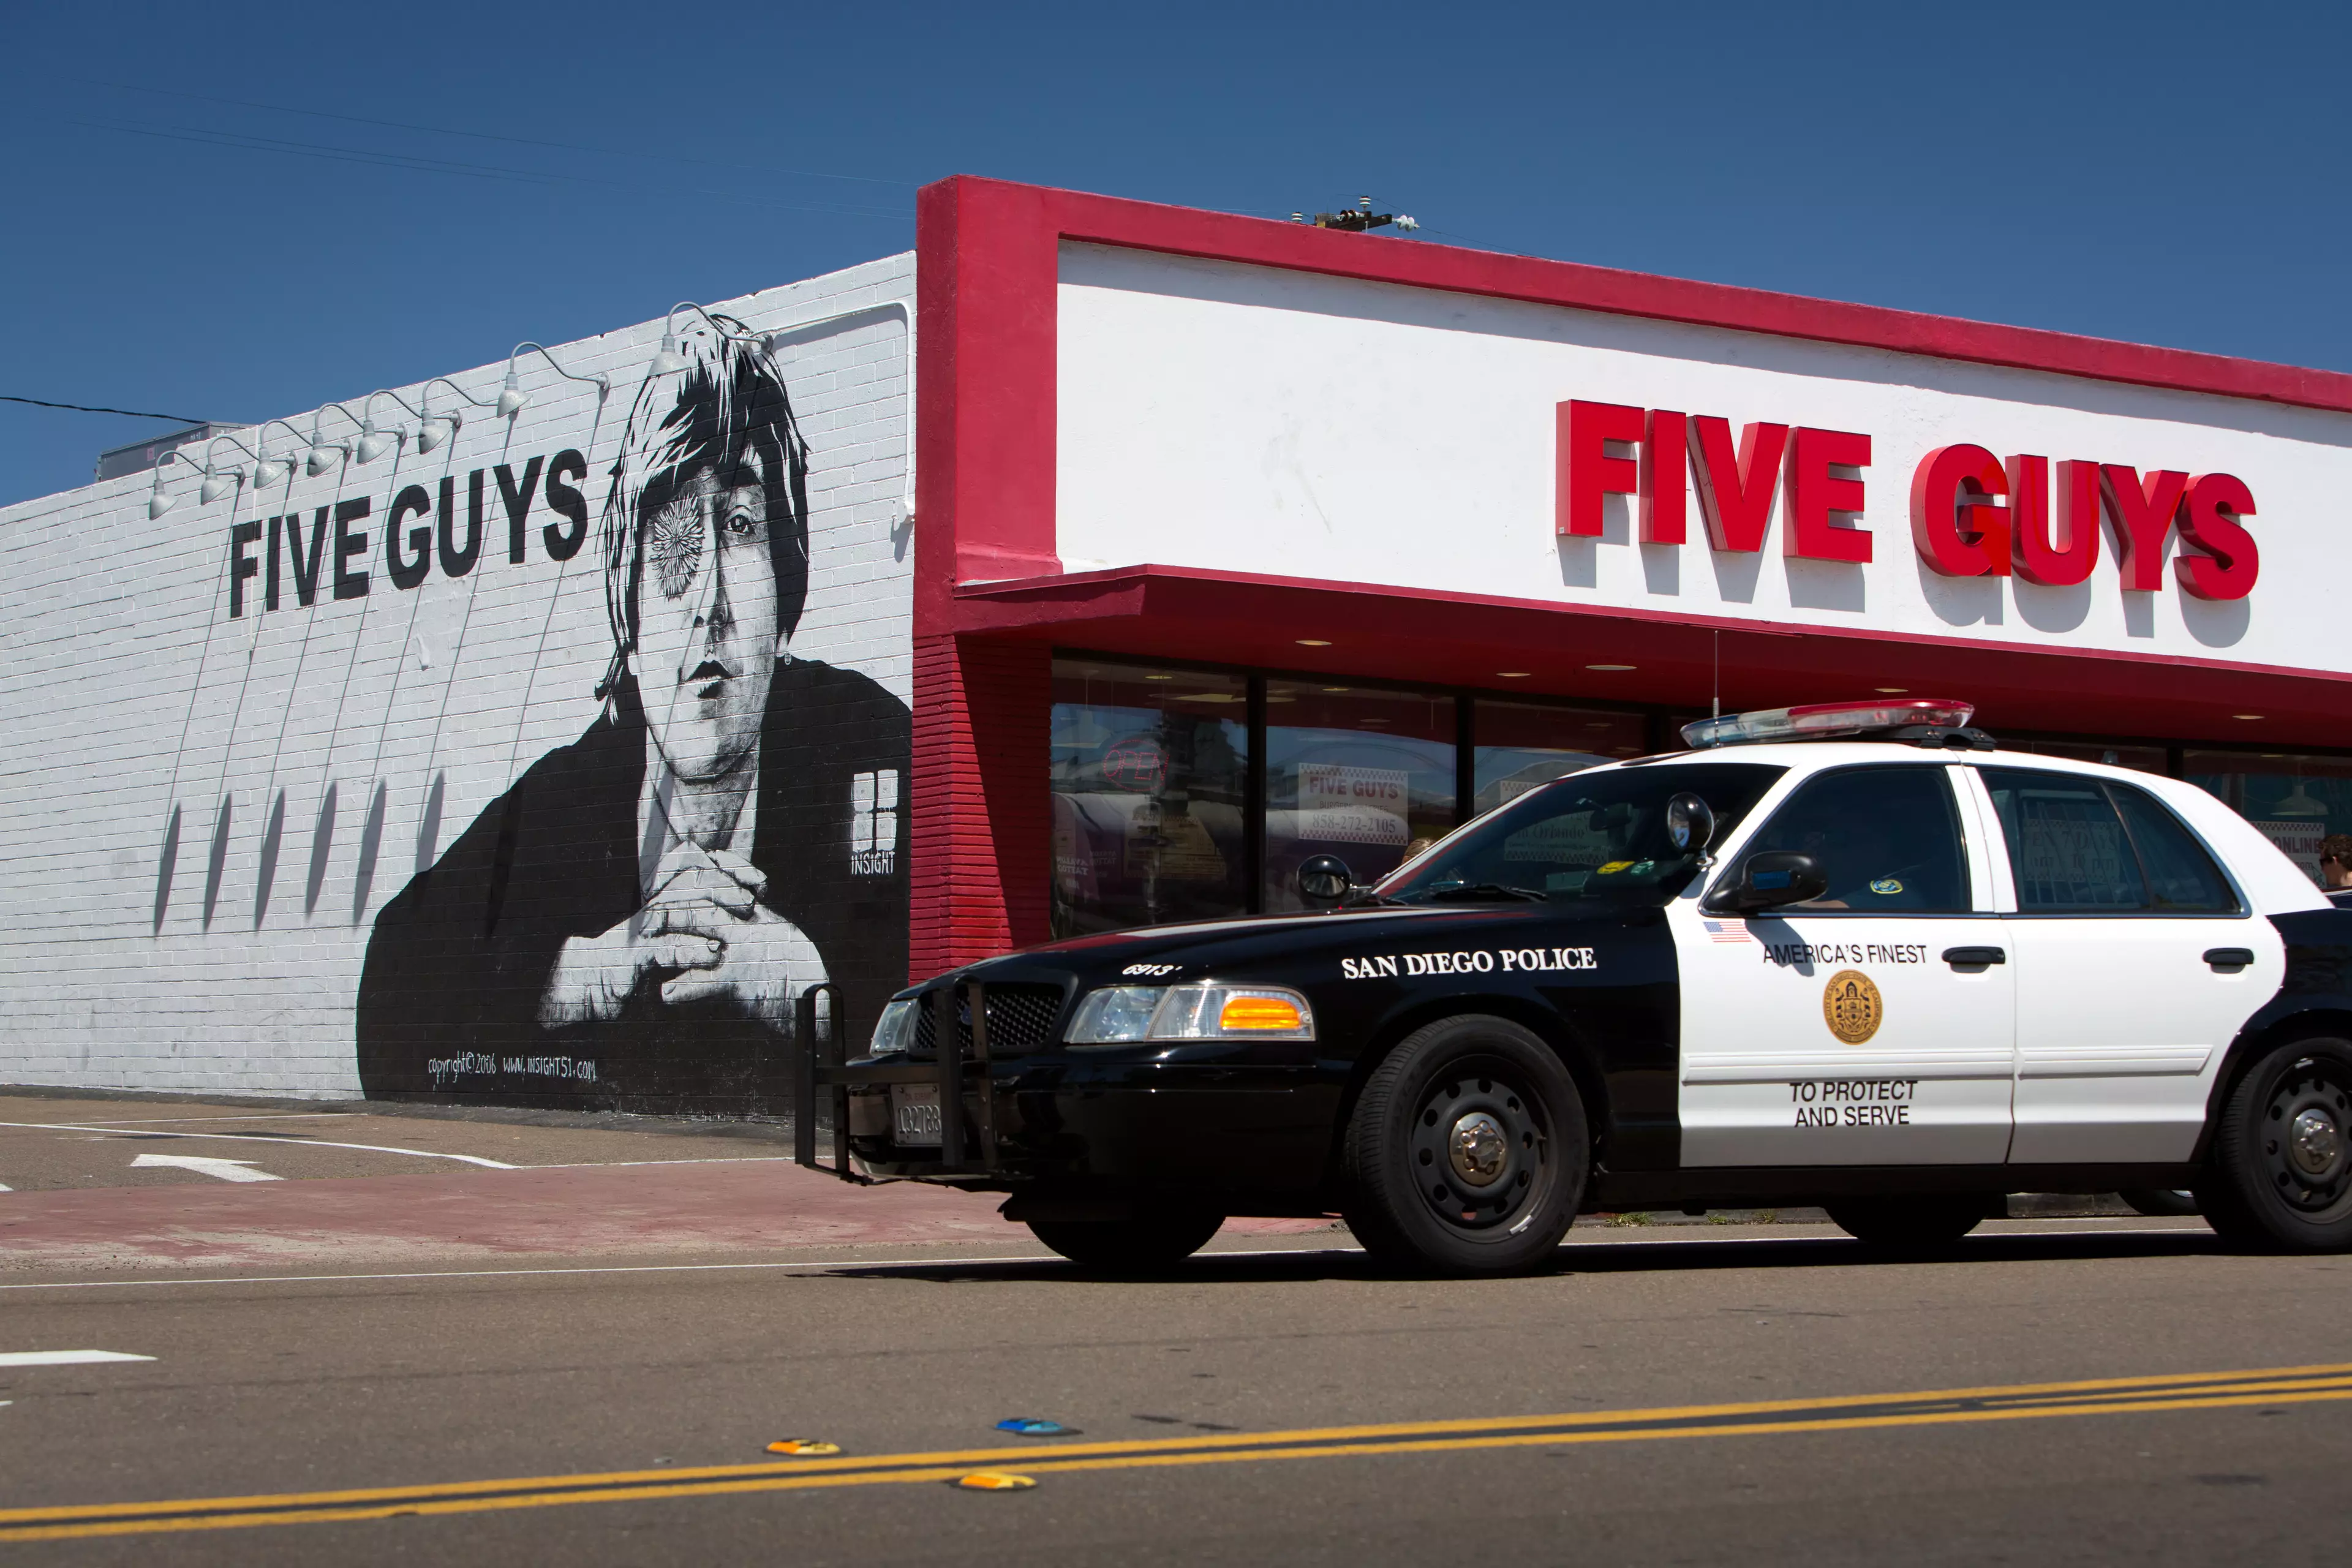 Police arrested five guys.